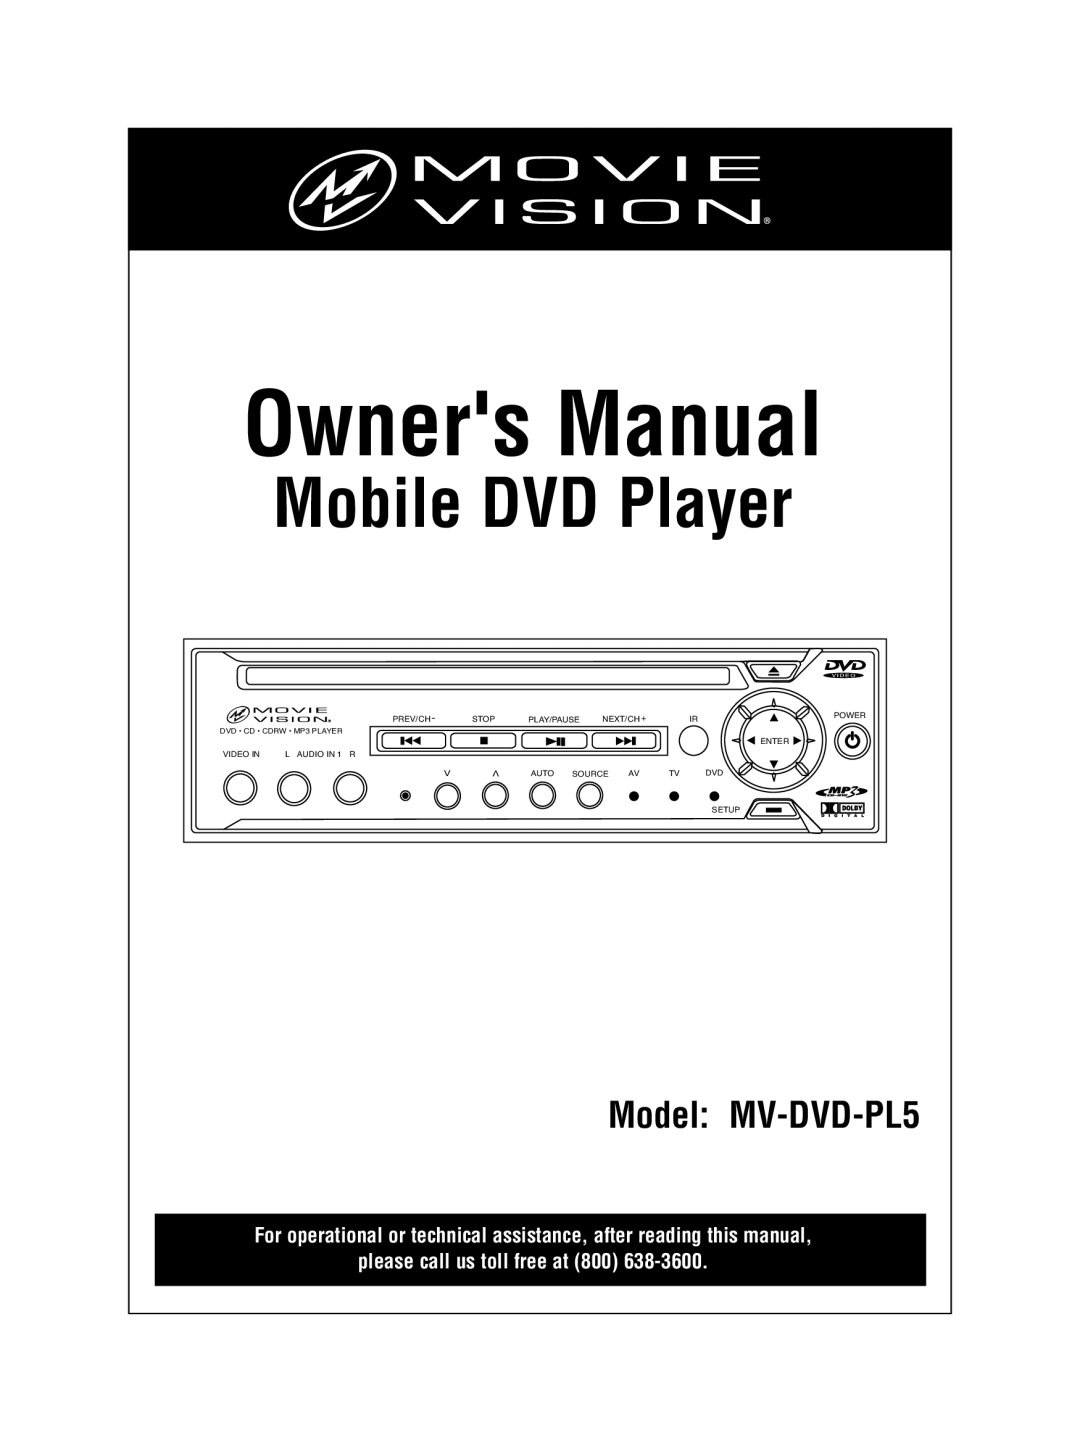 Magnadyne owner manual Owners Manual, Mobile DVD Player, Model MV-DVD-PL5, please call us toll free at 800 